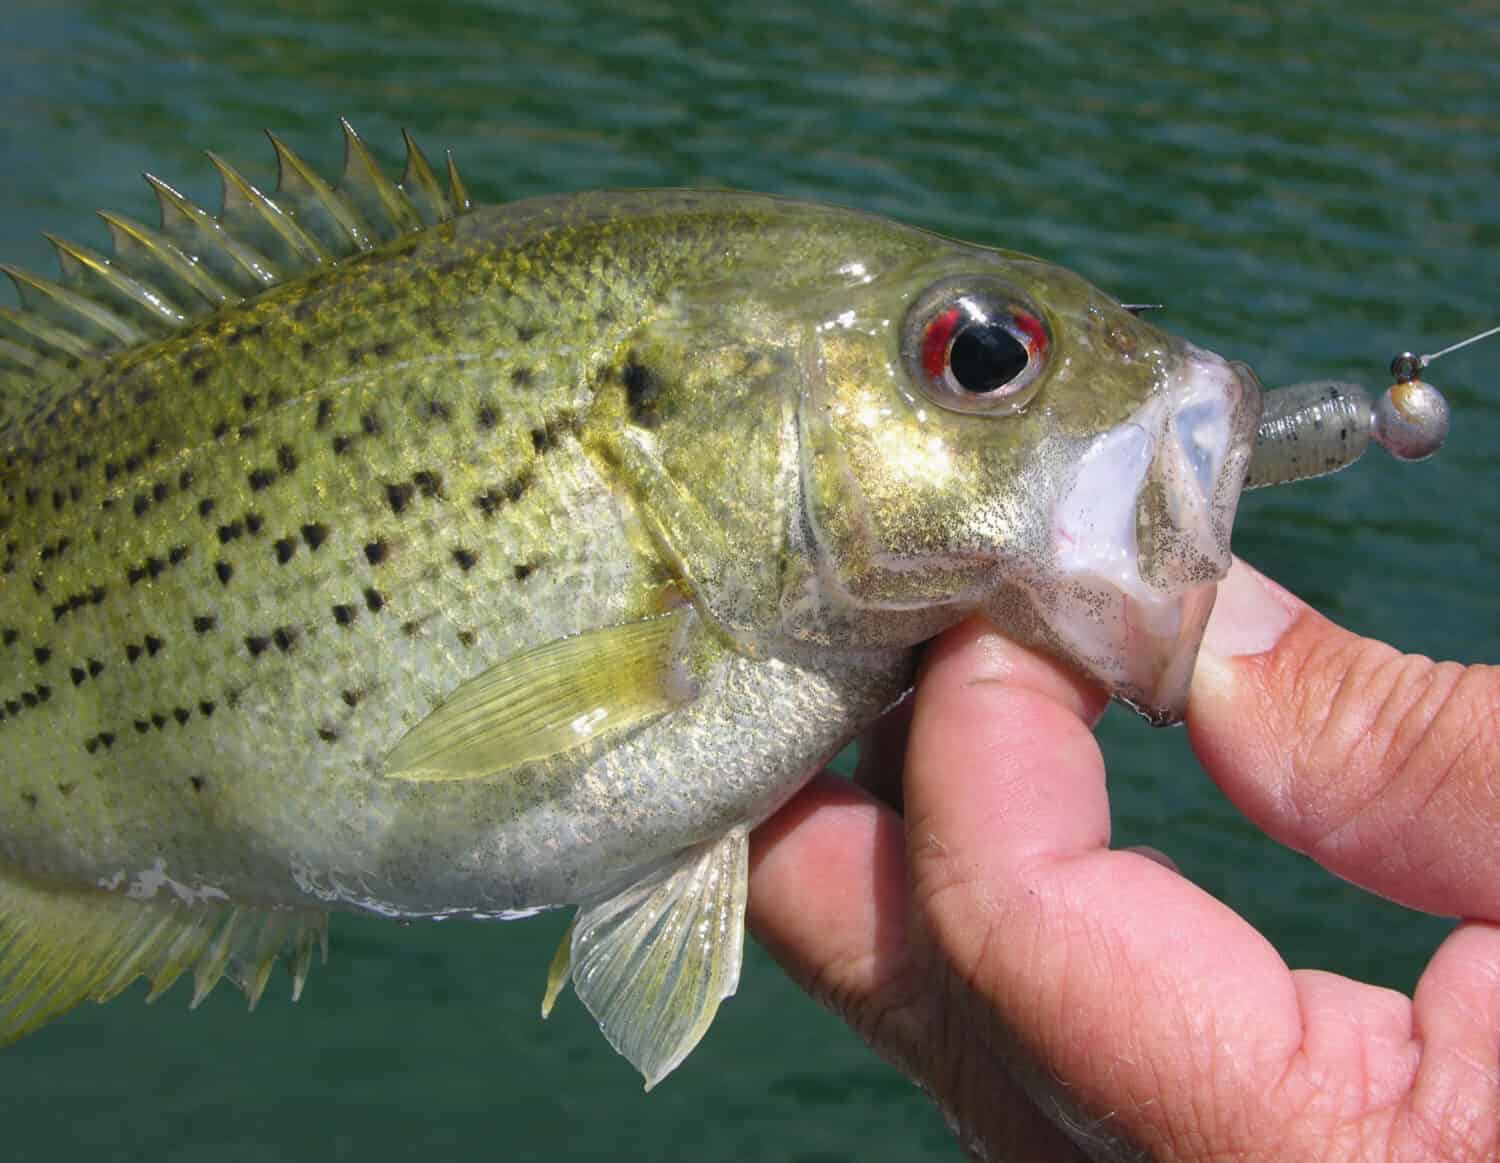 Rock bass caught by angler